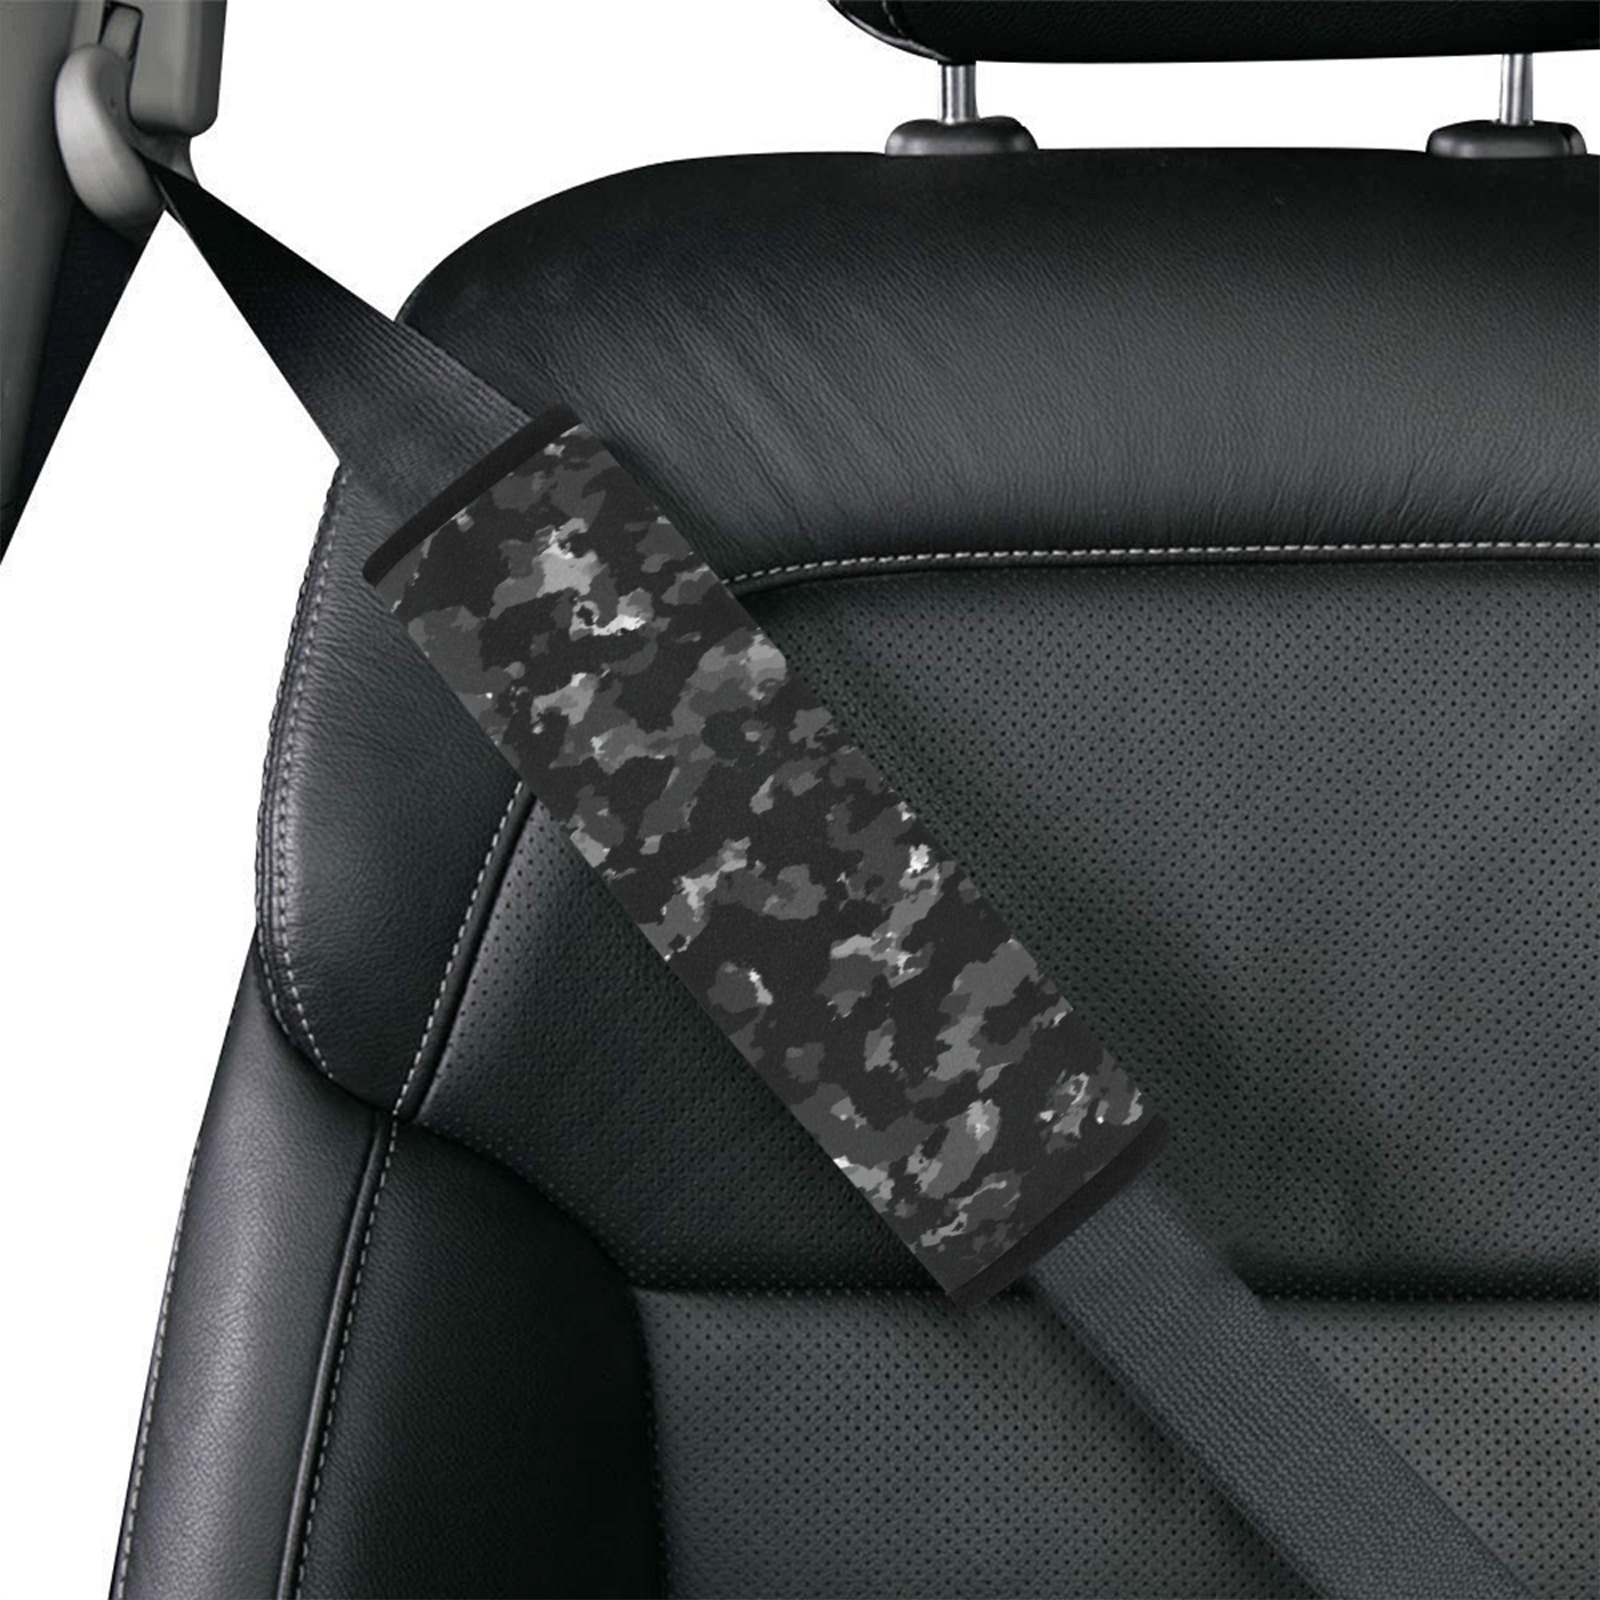 New Project (2) (1) Car Seat Belt Cover 7''x12.6''